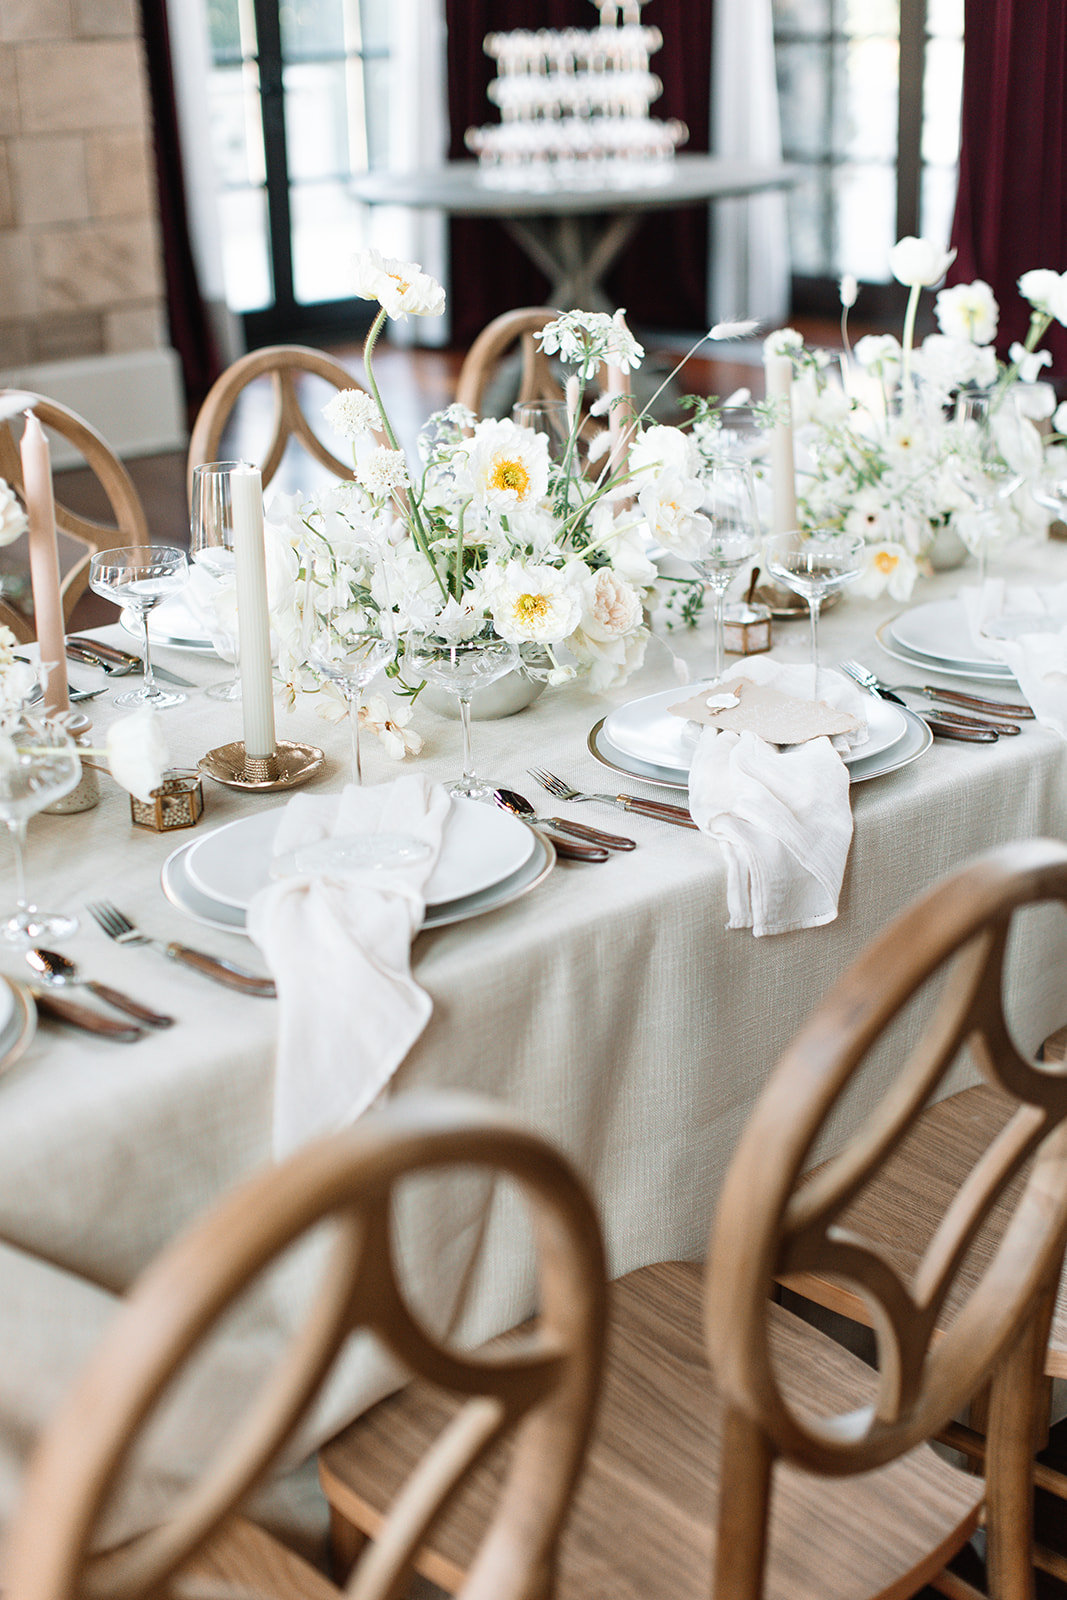 An elegantly decorated reception table captured by Kyla Jeanette Photo